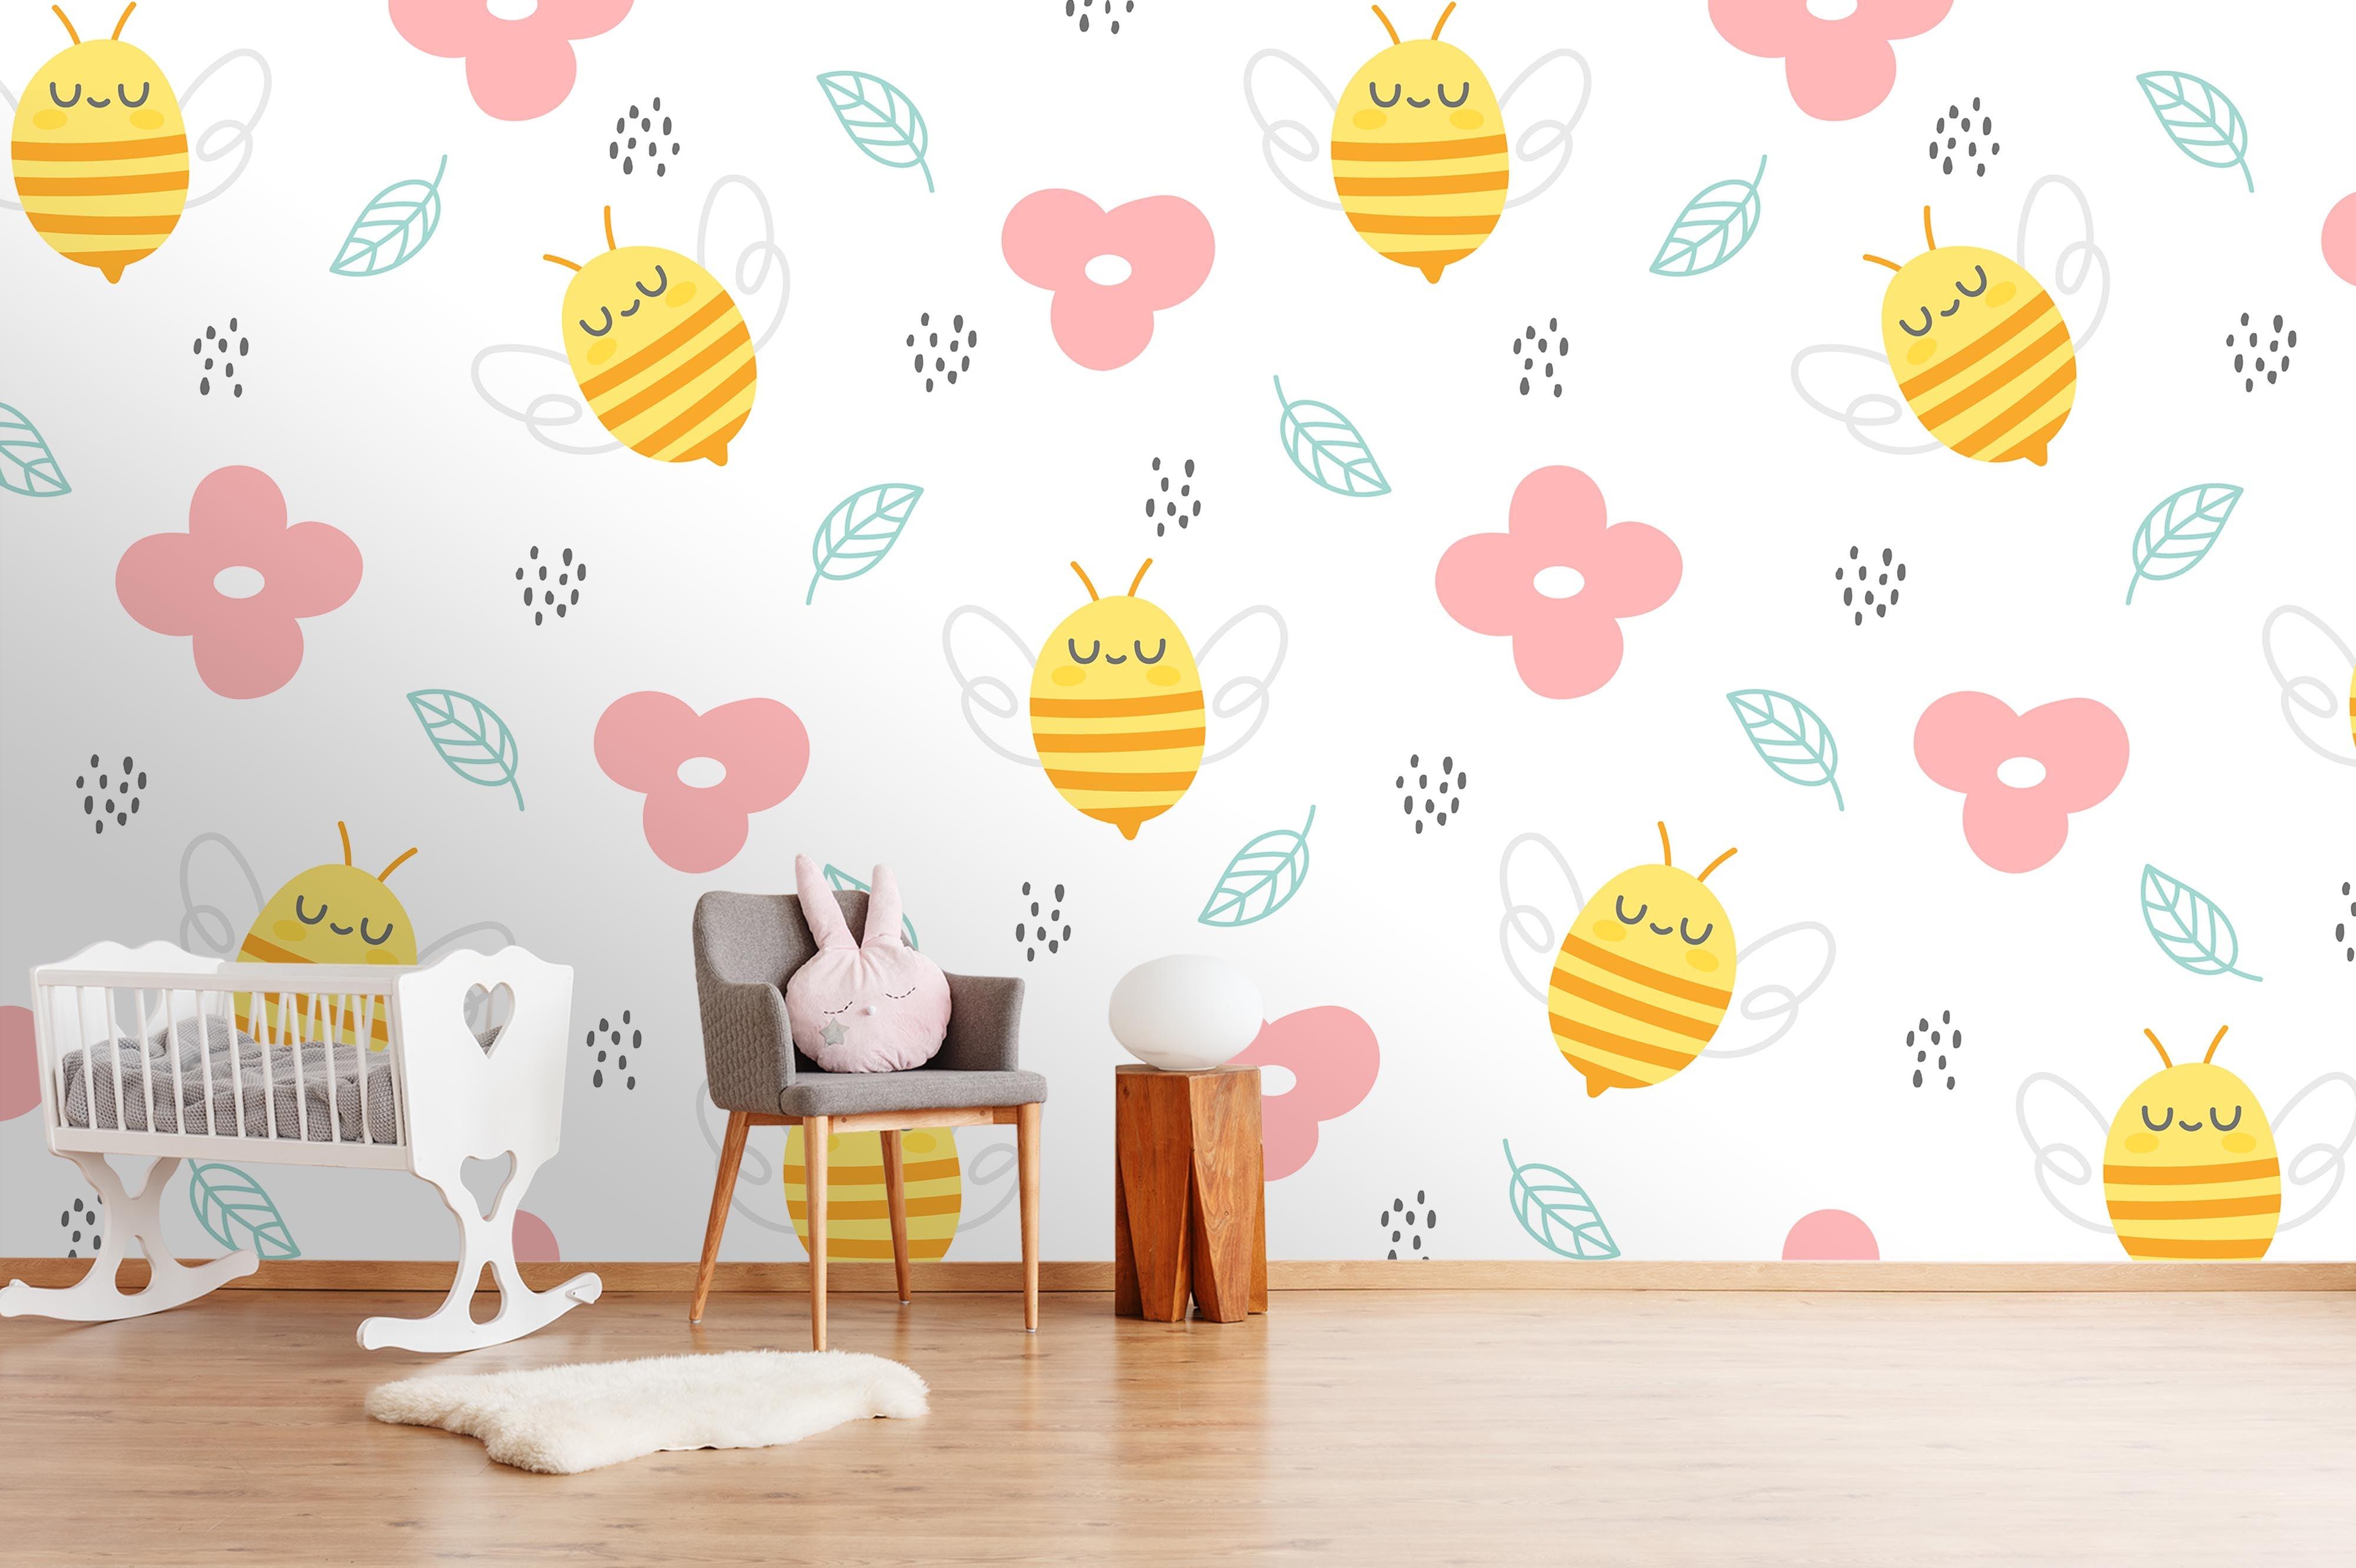 3D bee floral leaves wall mural wallpaper 38- Jess Art Decoration